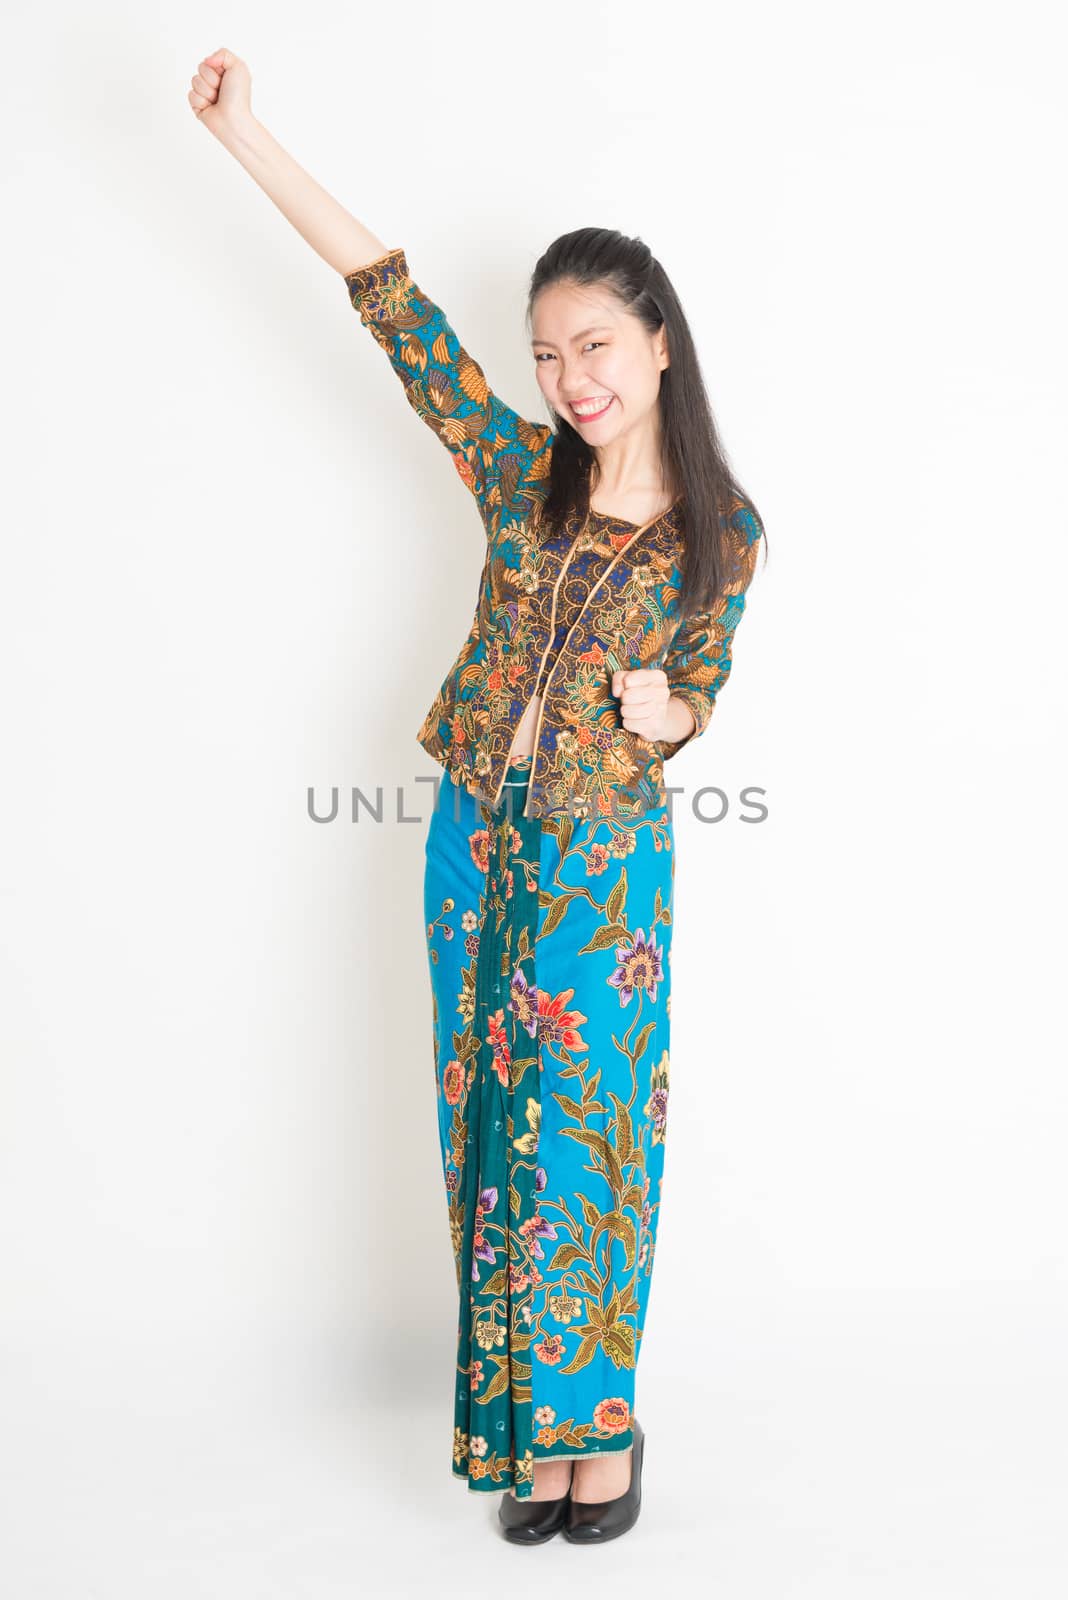 Portrait of young southeast Asian woman in traditional Malay batik kebaya dress arm raised celebrating success, full length standing on plain background.